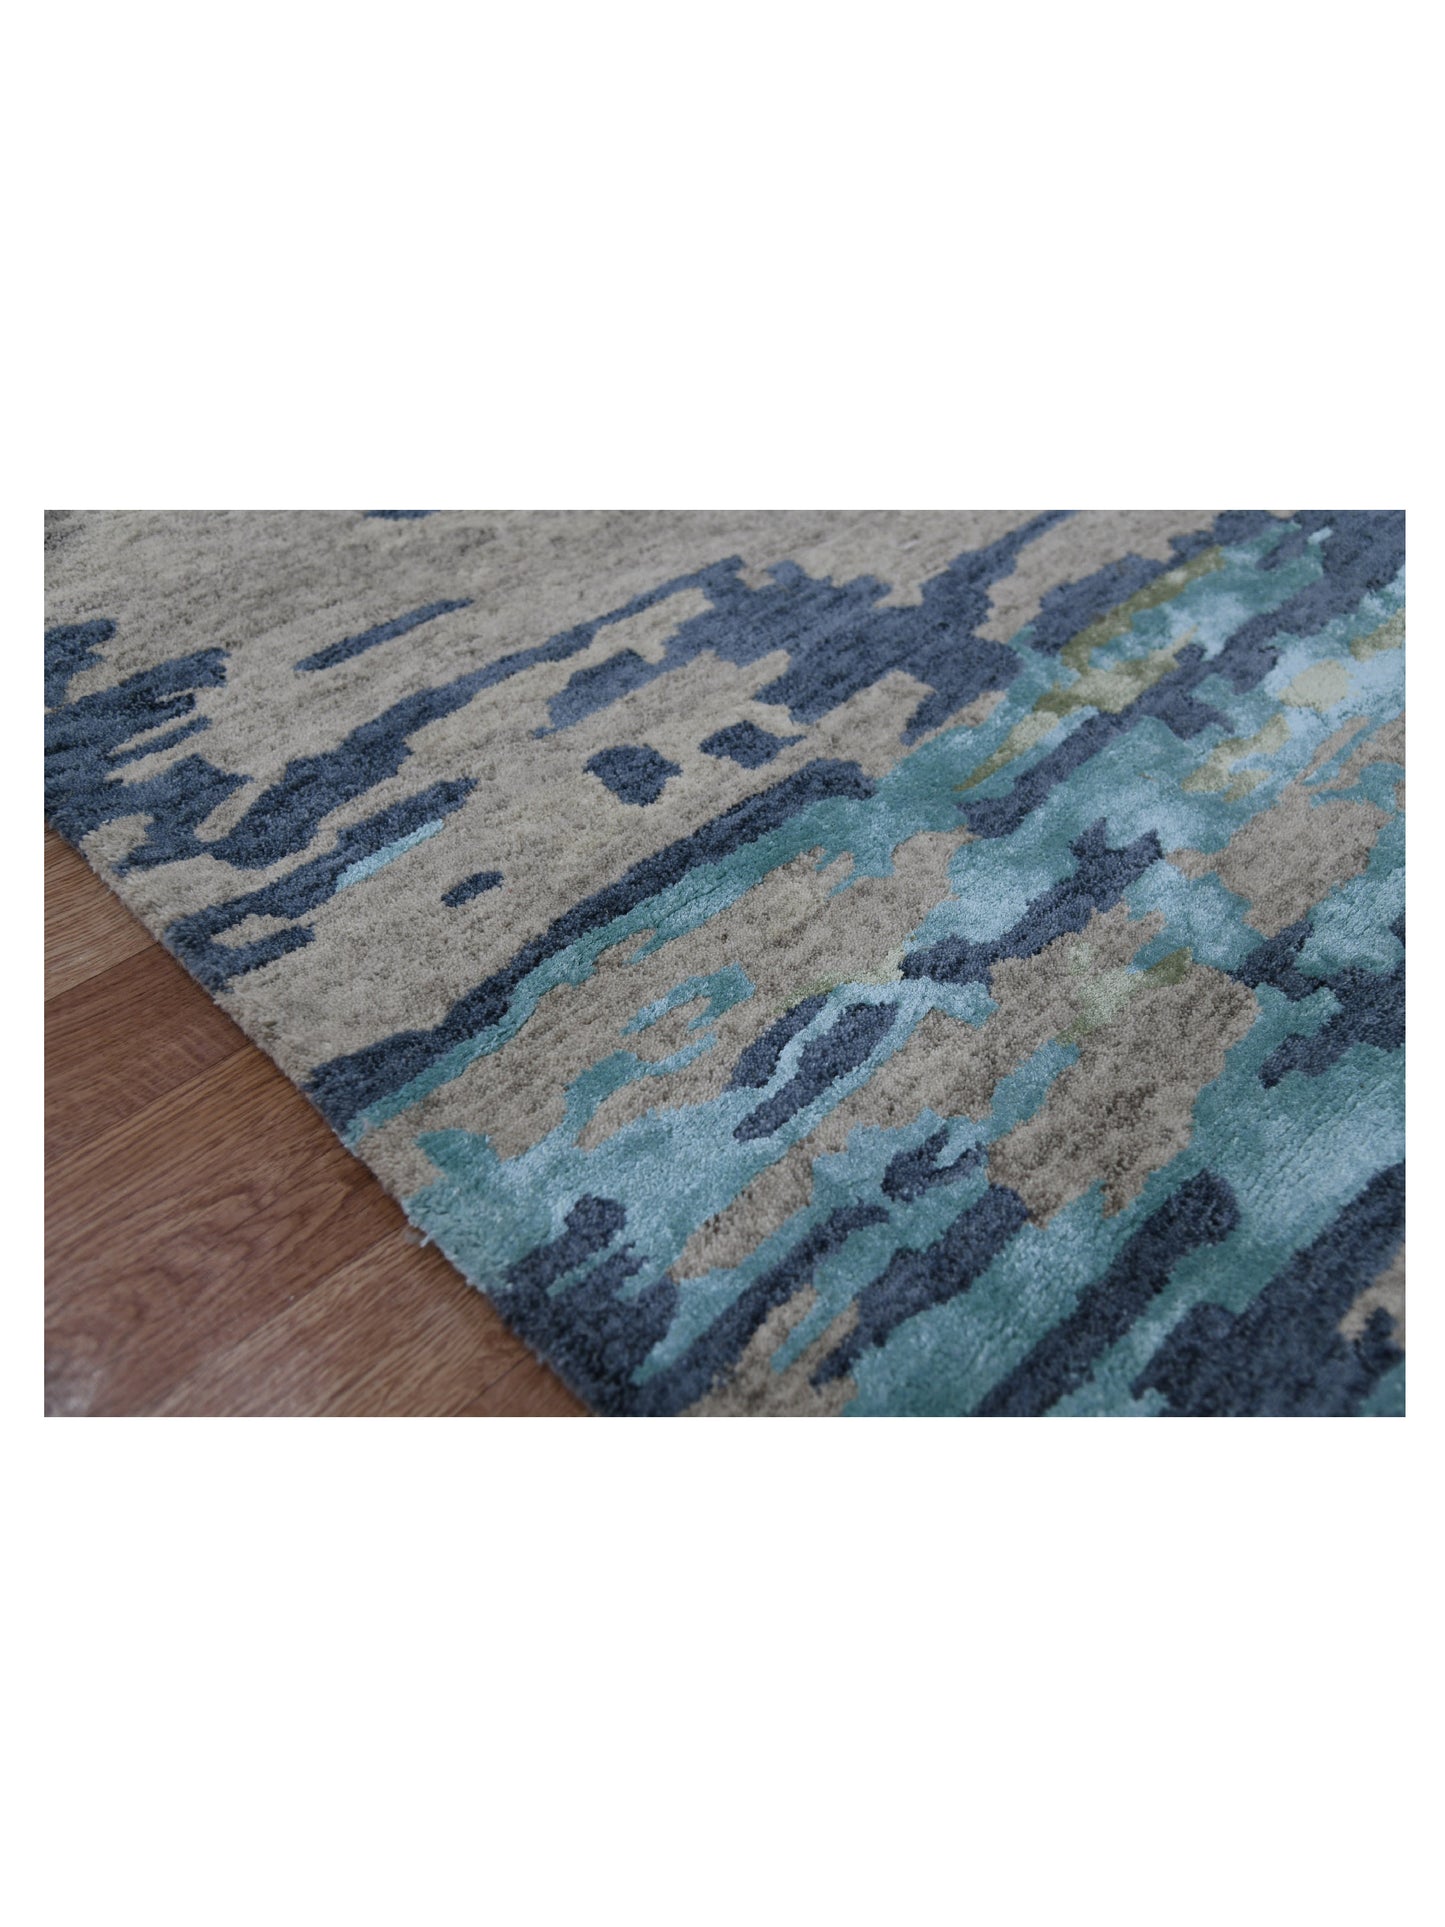 Limited ADELAIDE AD-102 SAND  Transitional Tufted Rug